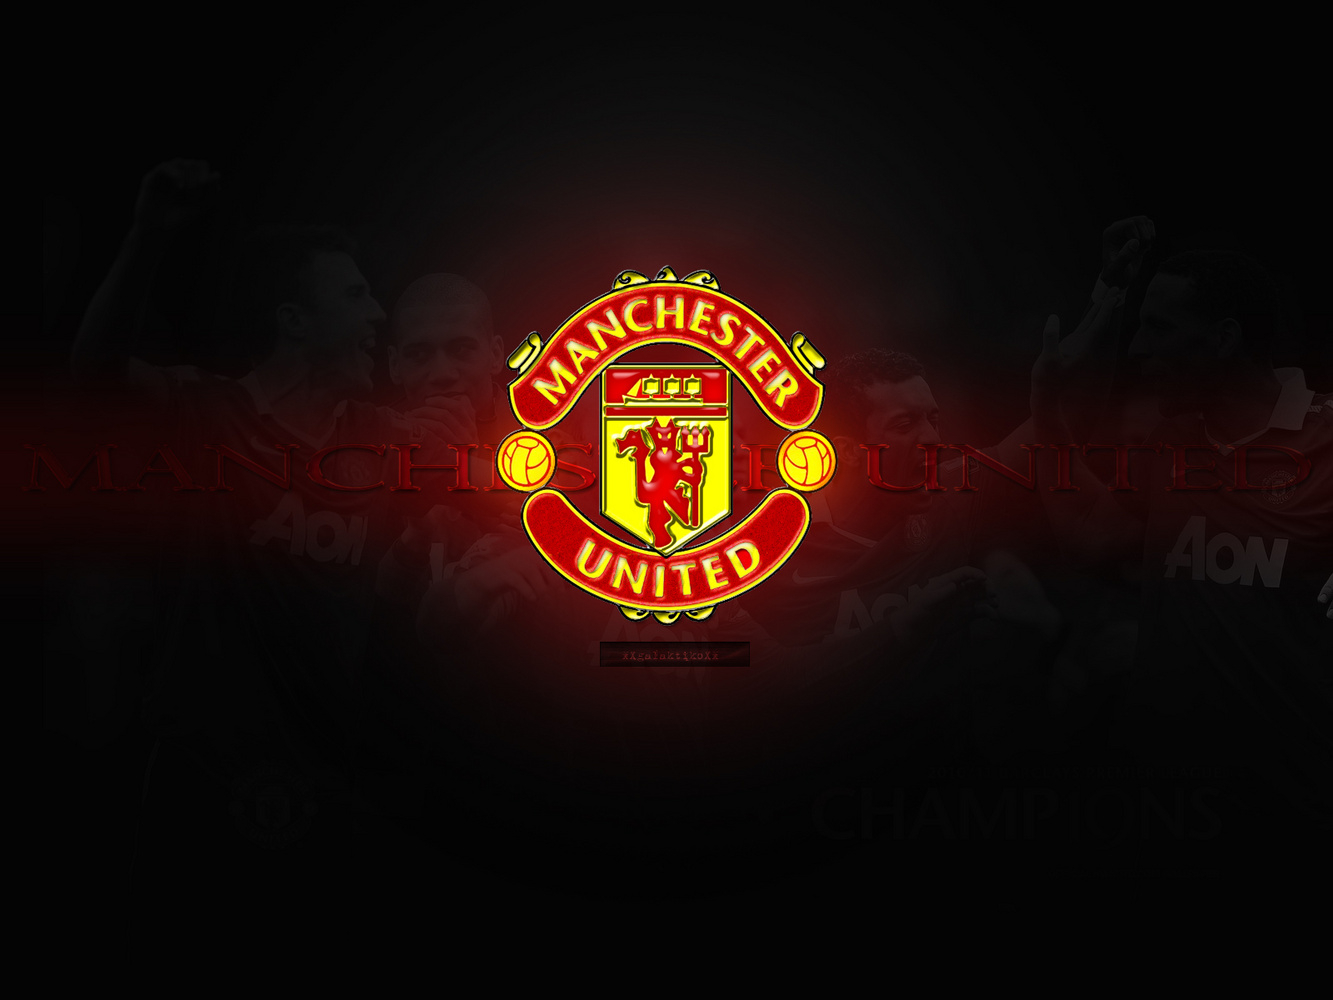 World Sports Hd Wallpapers Manchester United Hd